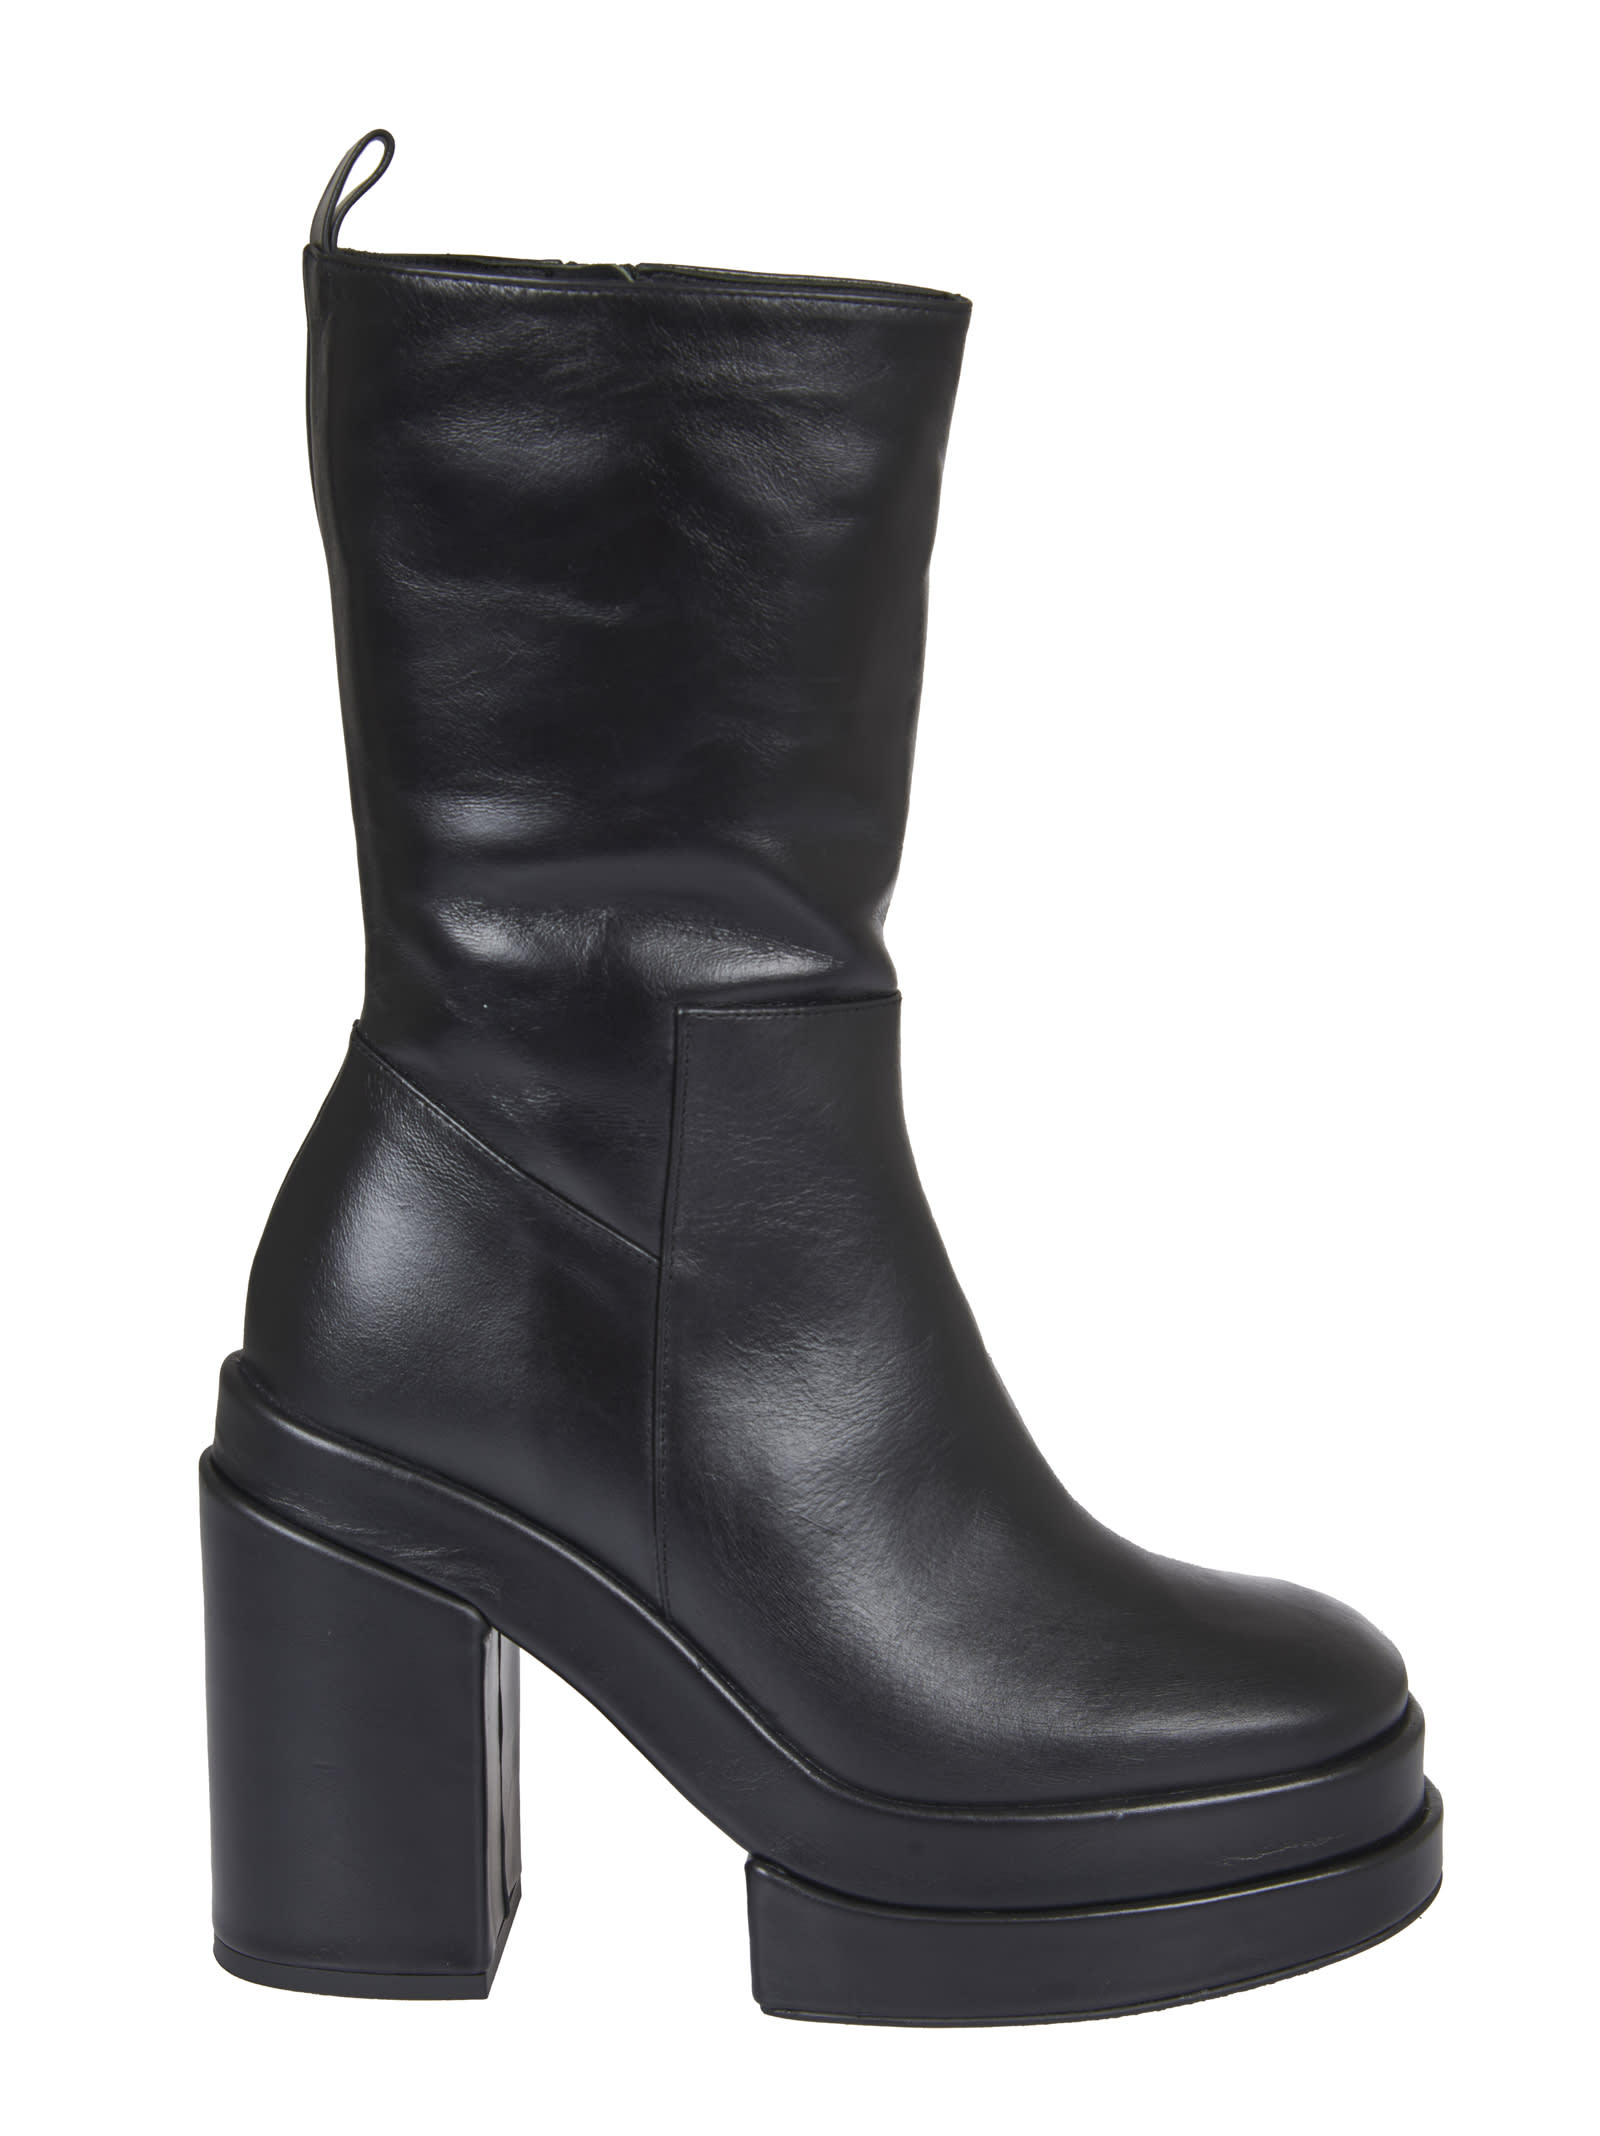 Paloma Barceló Black Ankle Boots With Heel